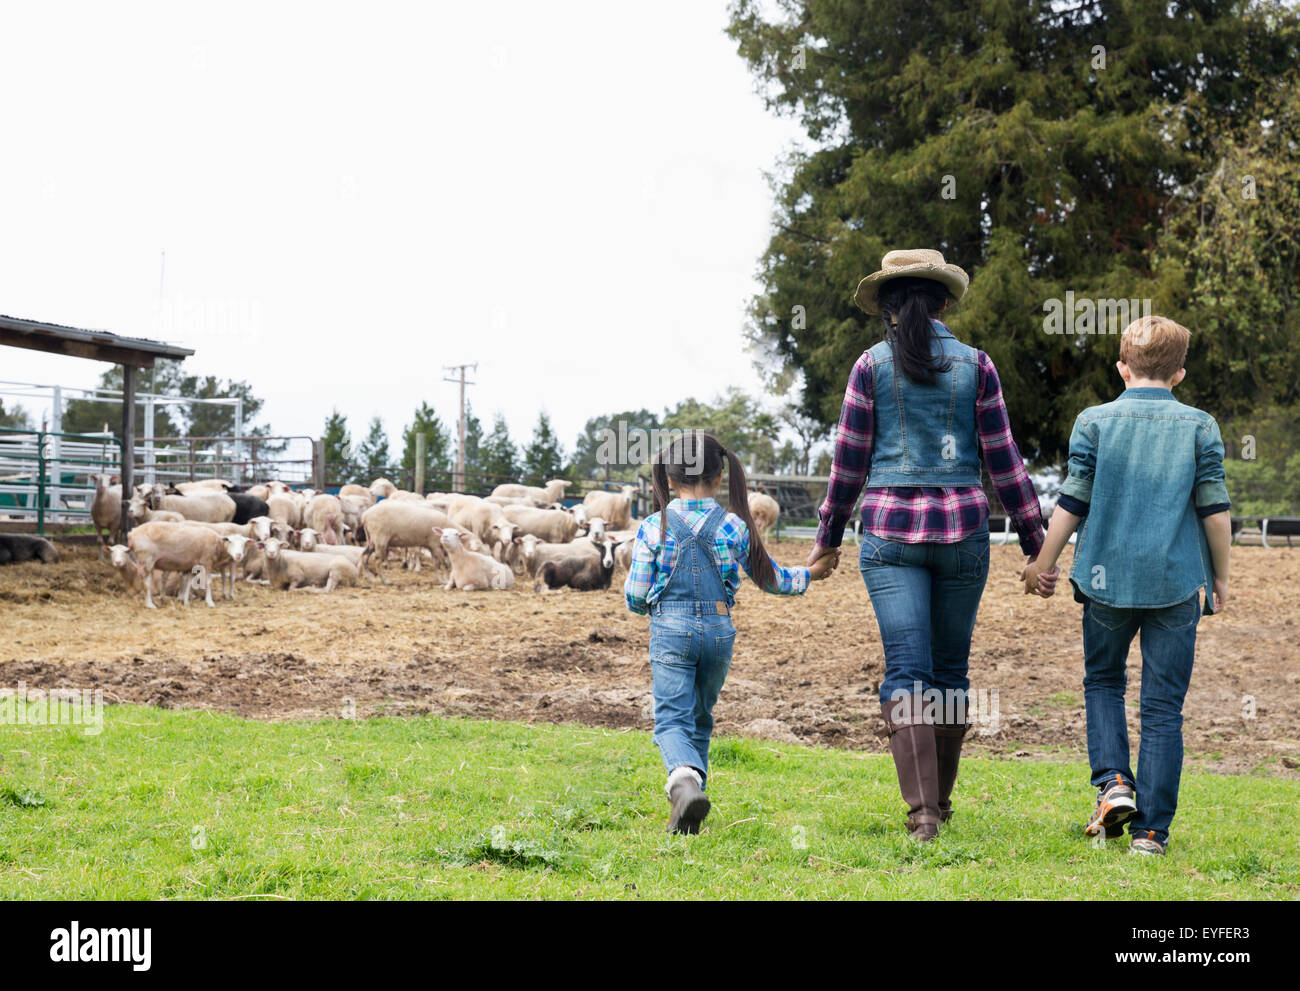 Mother with daughter (6-7) and son (10-11) on farm with sheep Stock Photo